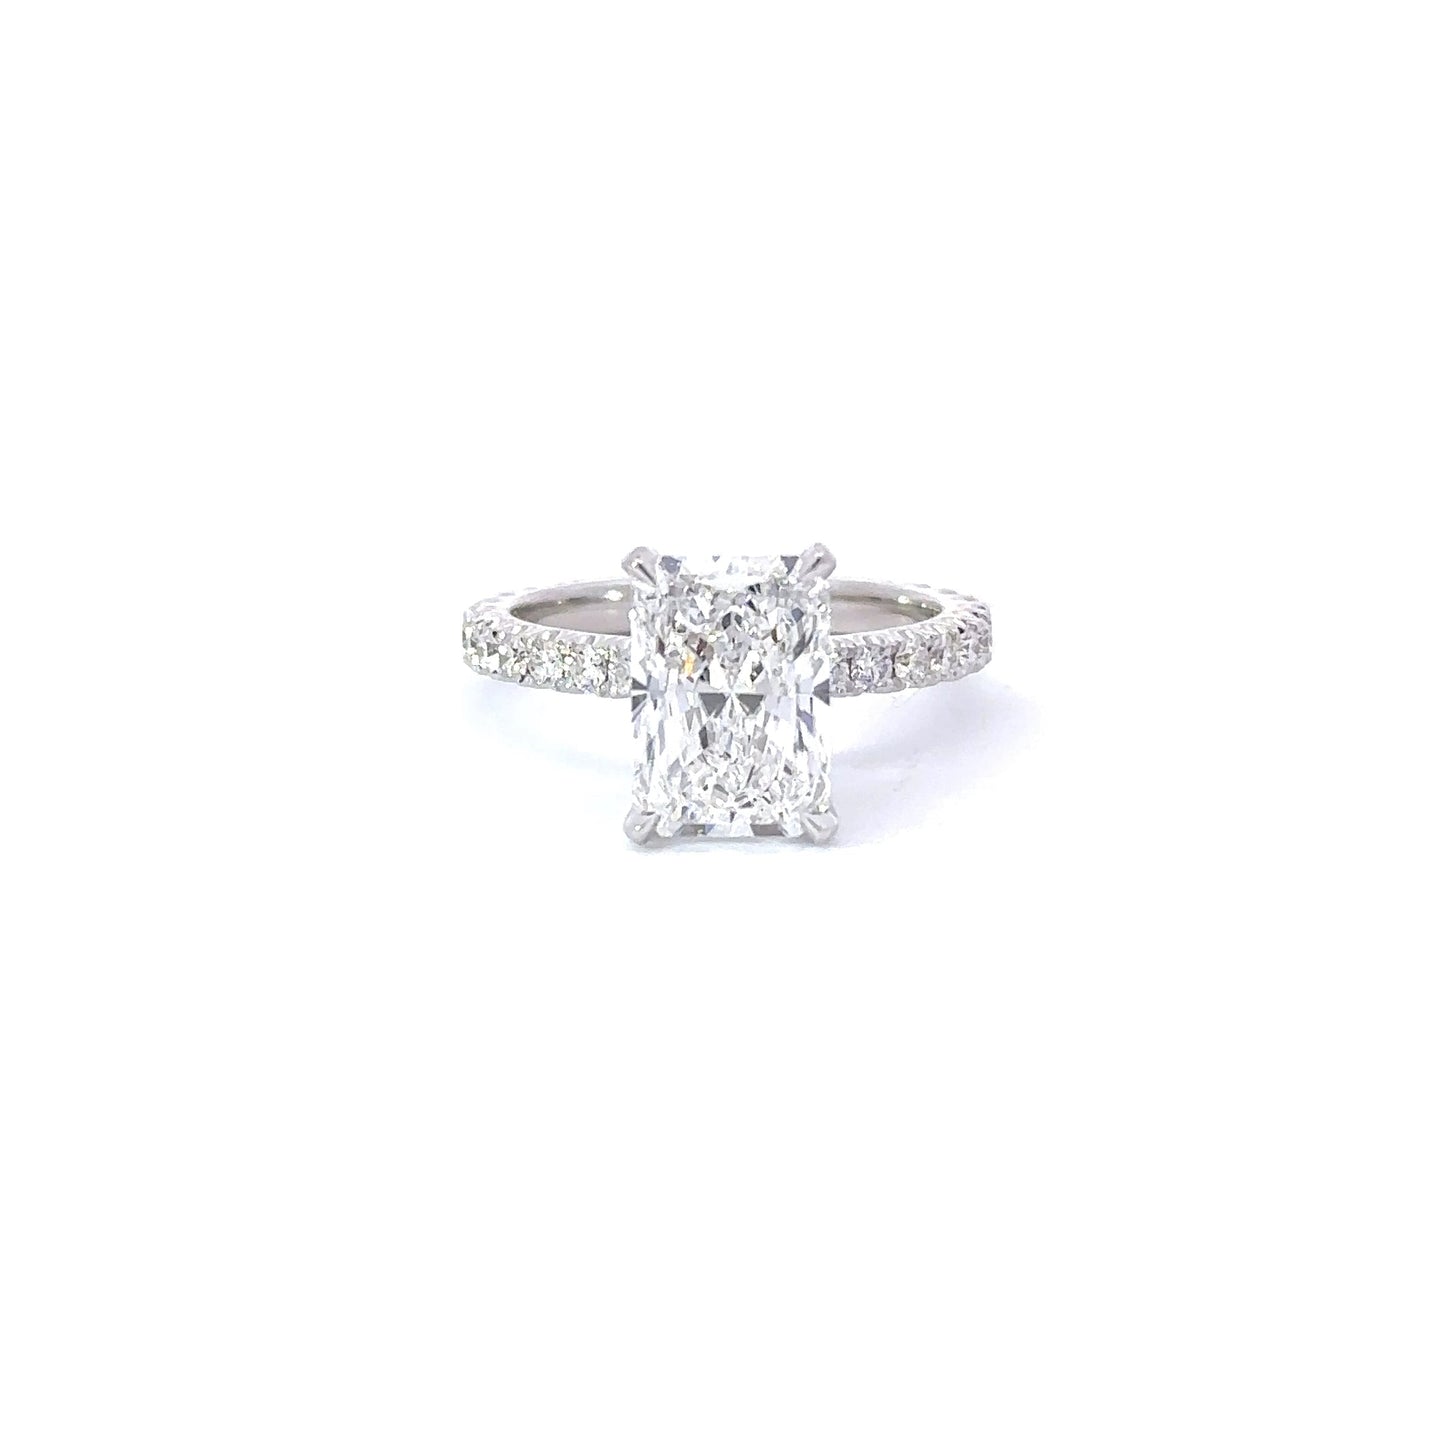 4.00-4.99 Carat Radiant Lab Grown Diamond Engagement Ring with Signature Setting - Happy Jewelers Fine Jewelry Lifetime Warranty